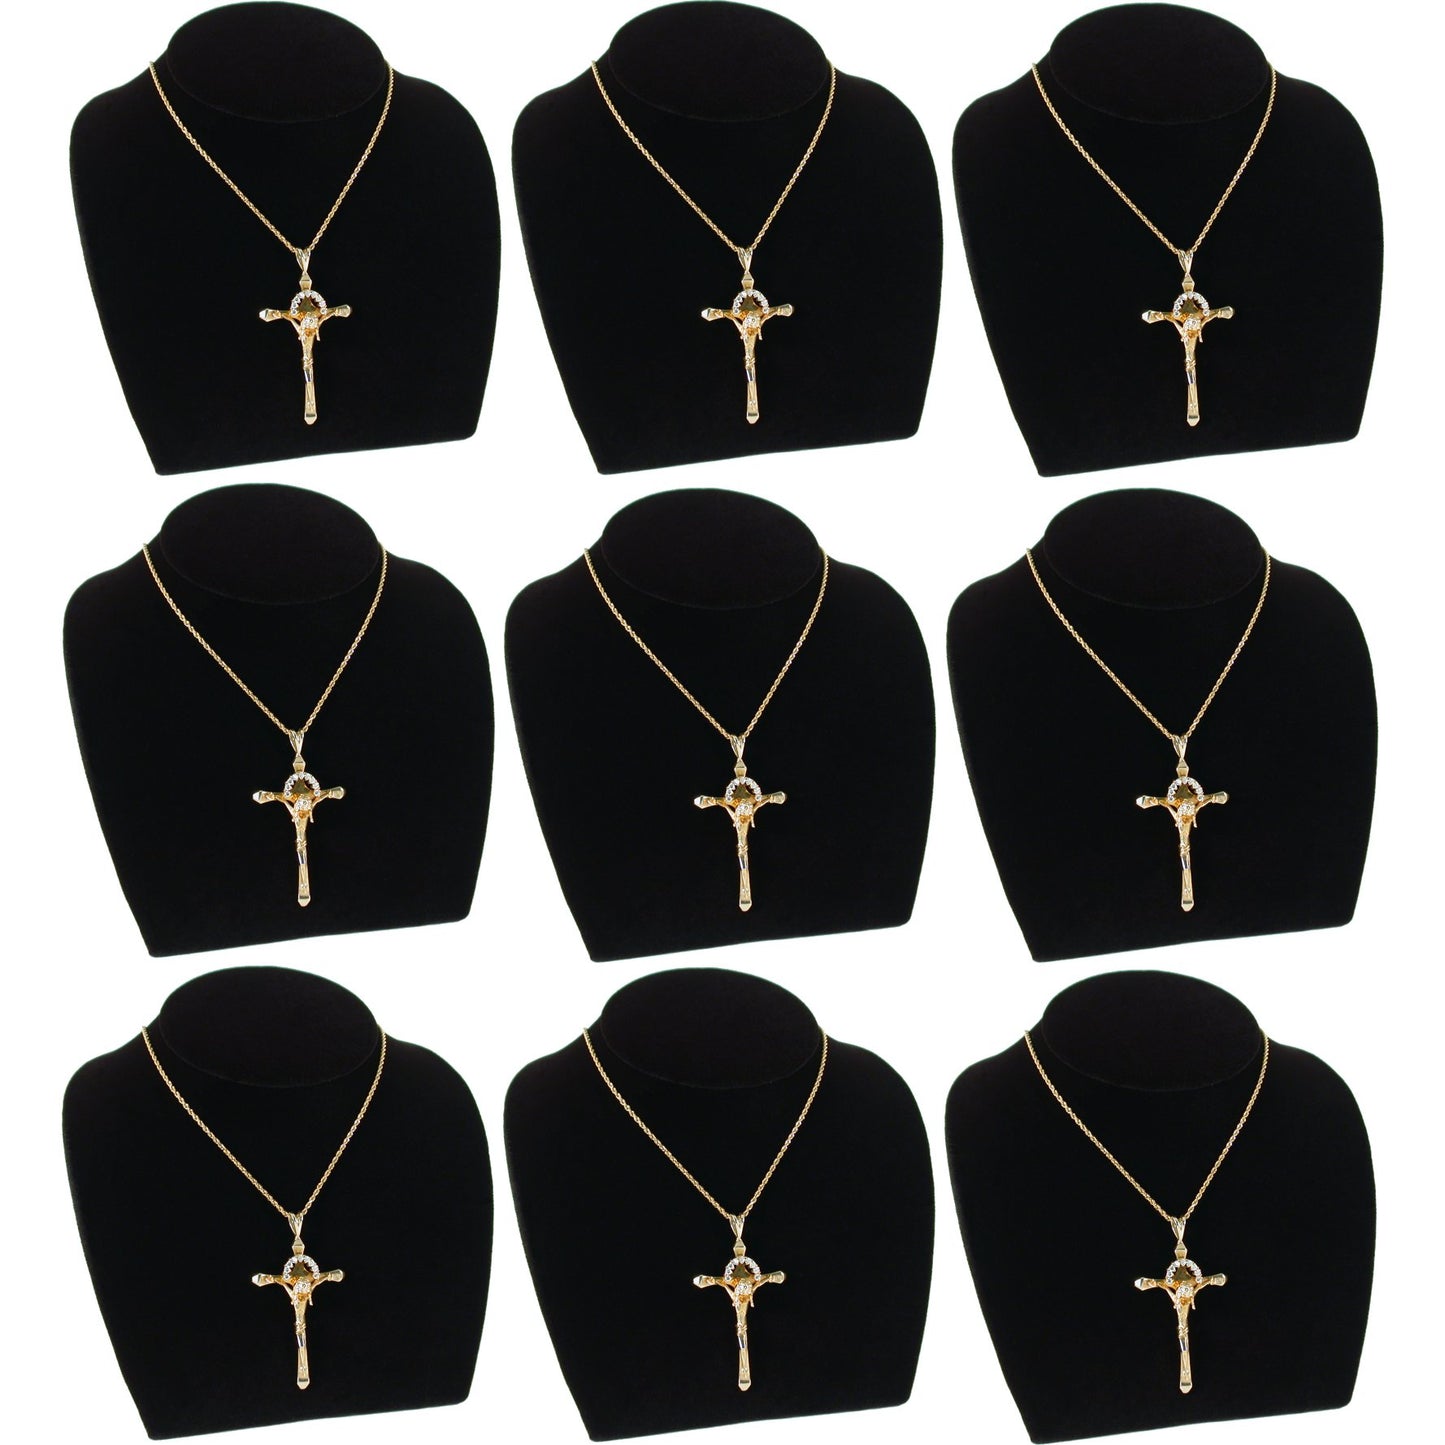 9 Pc Black Velvet Necklace Bust Chain Jewelry Display